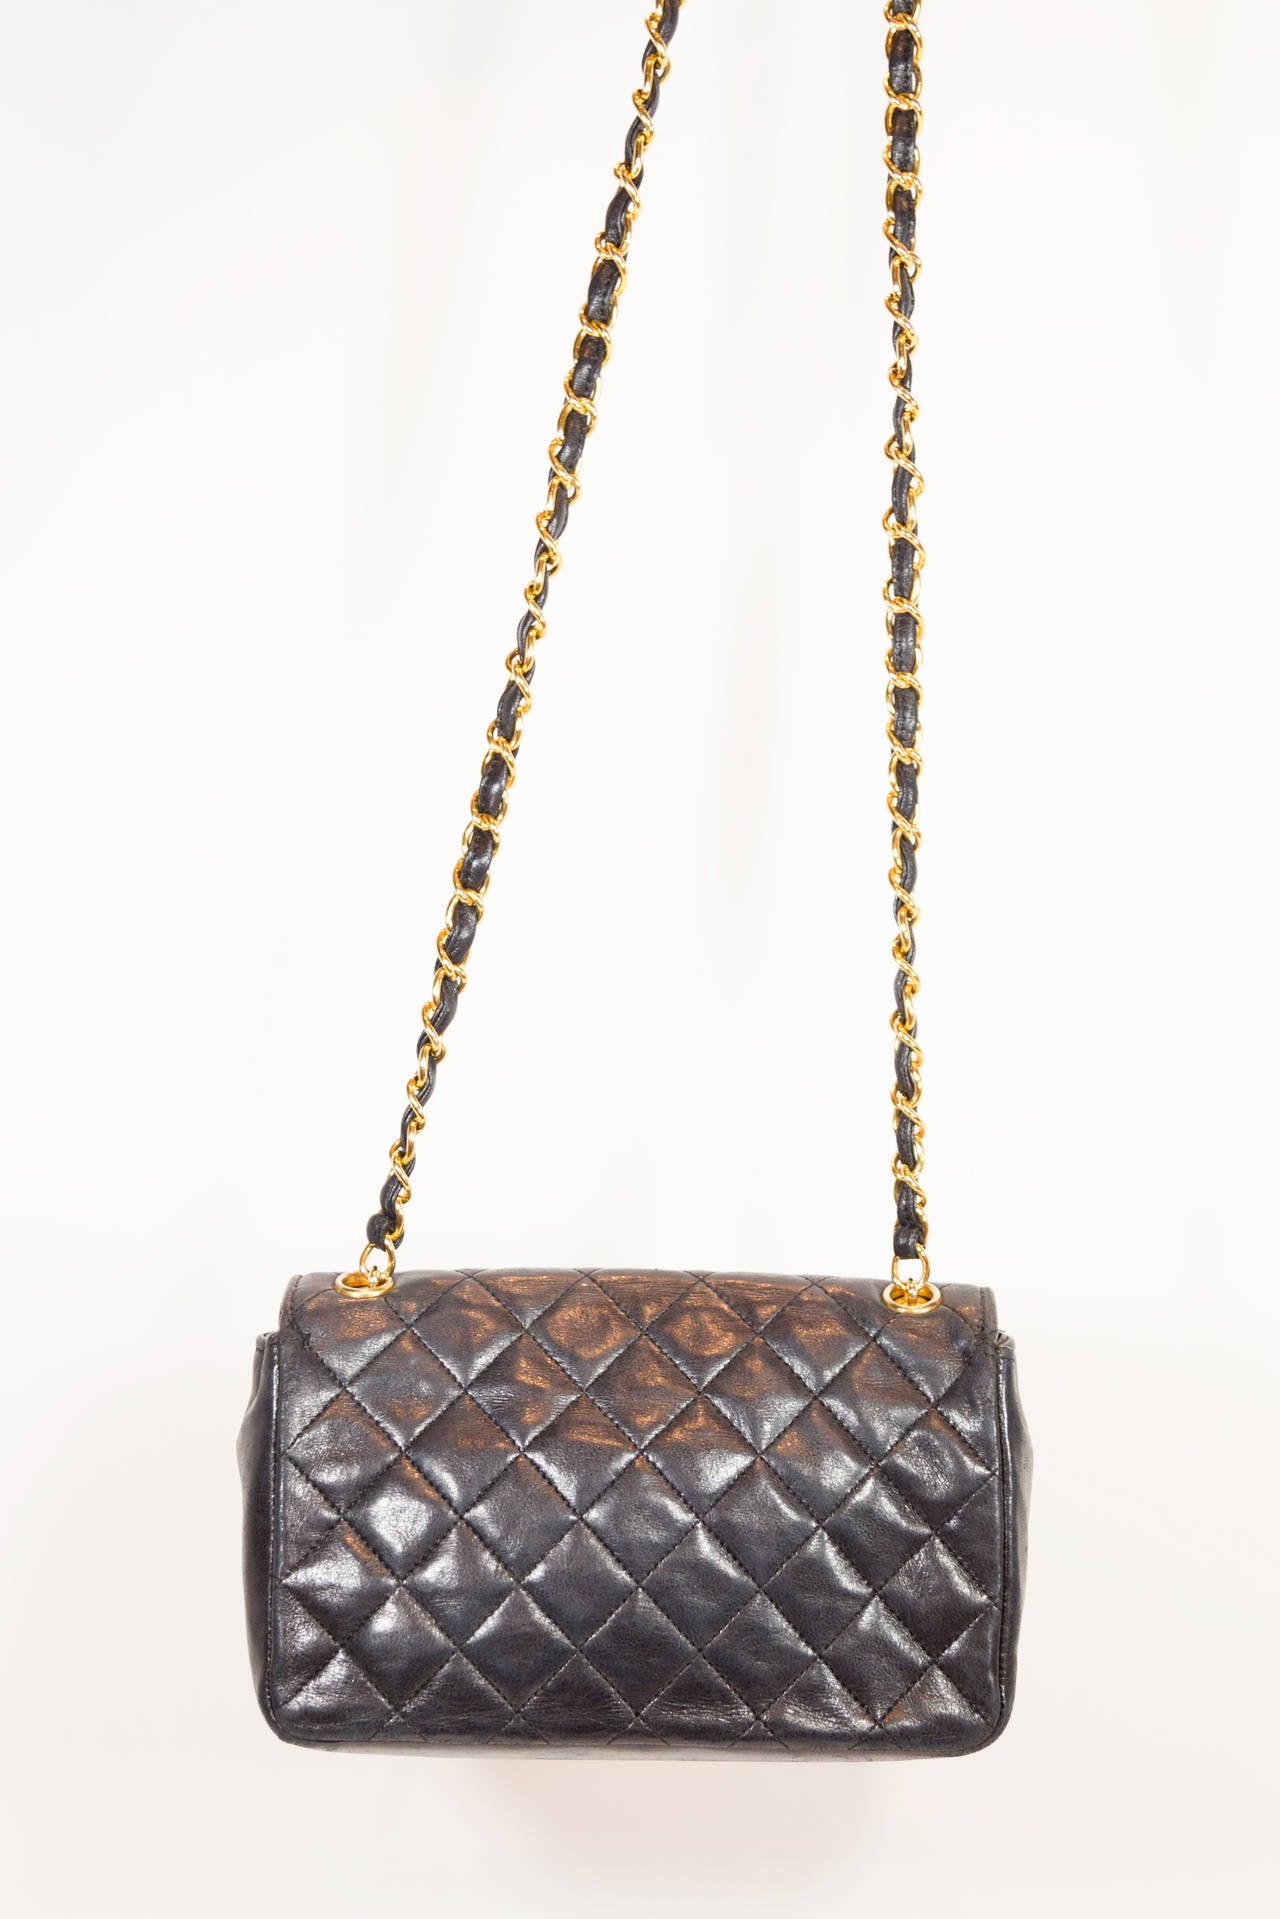 Chanel Vintage Black Quilted Cross Body Bag 1